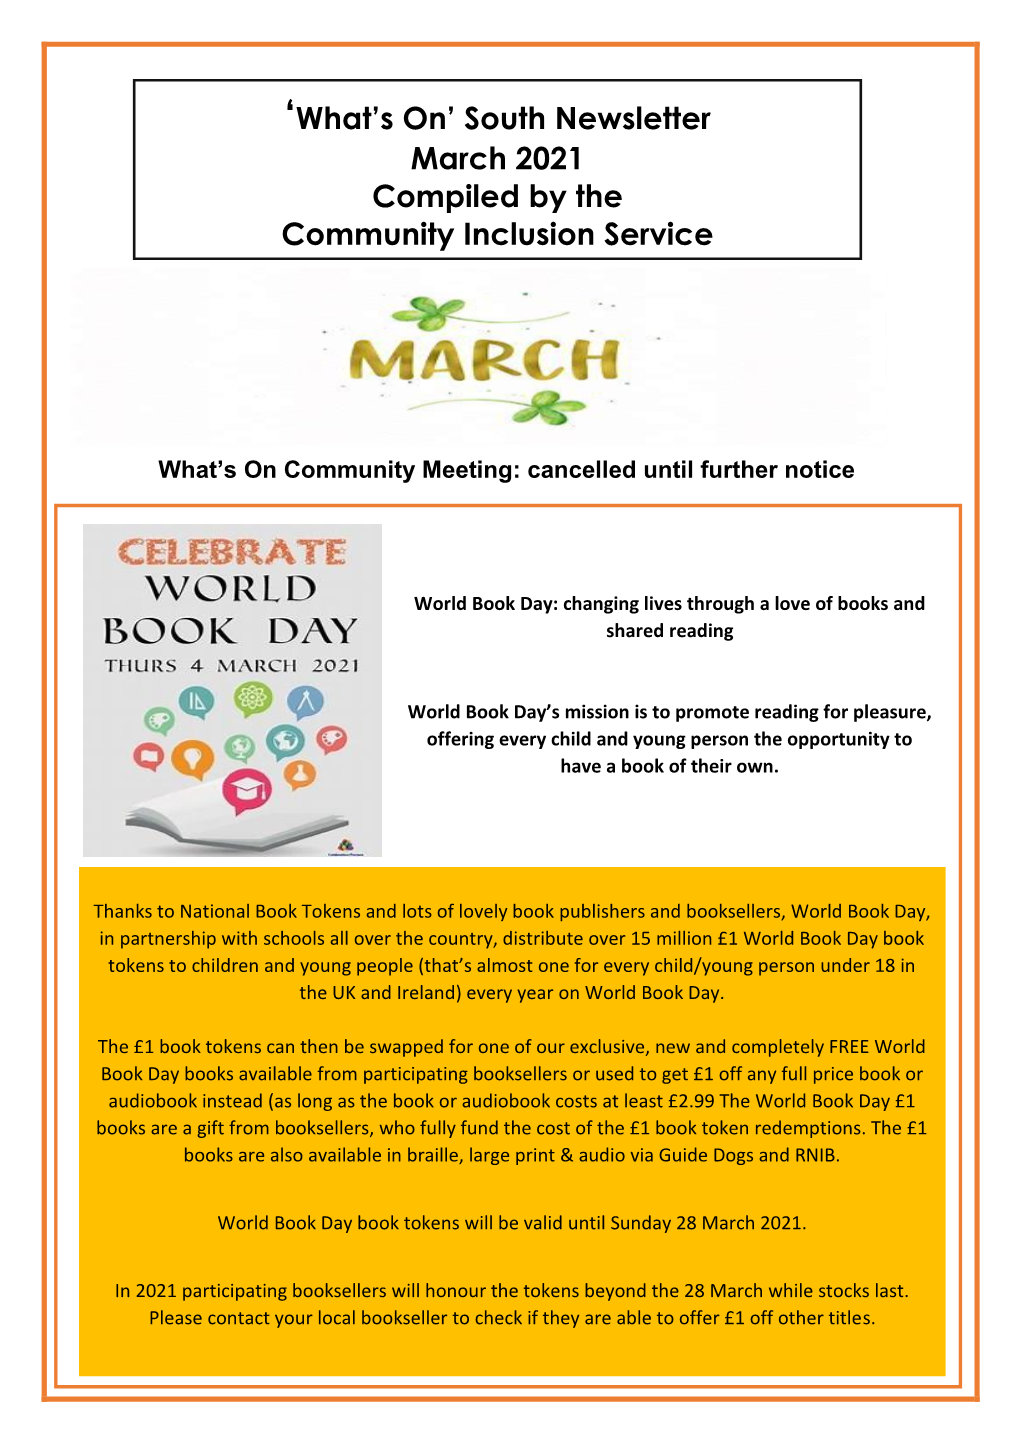 'What's On' South Newsletter March 2021 Compiled by the Community